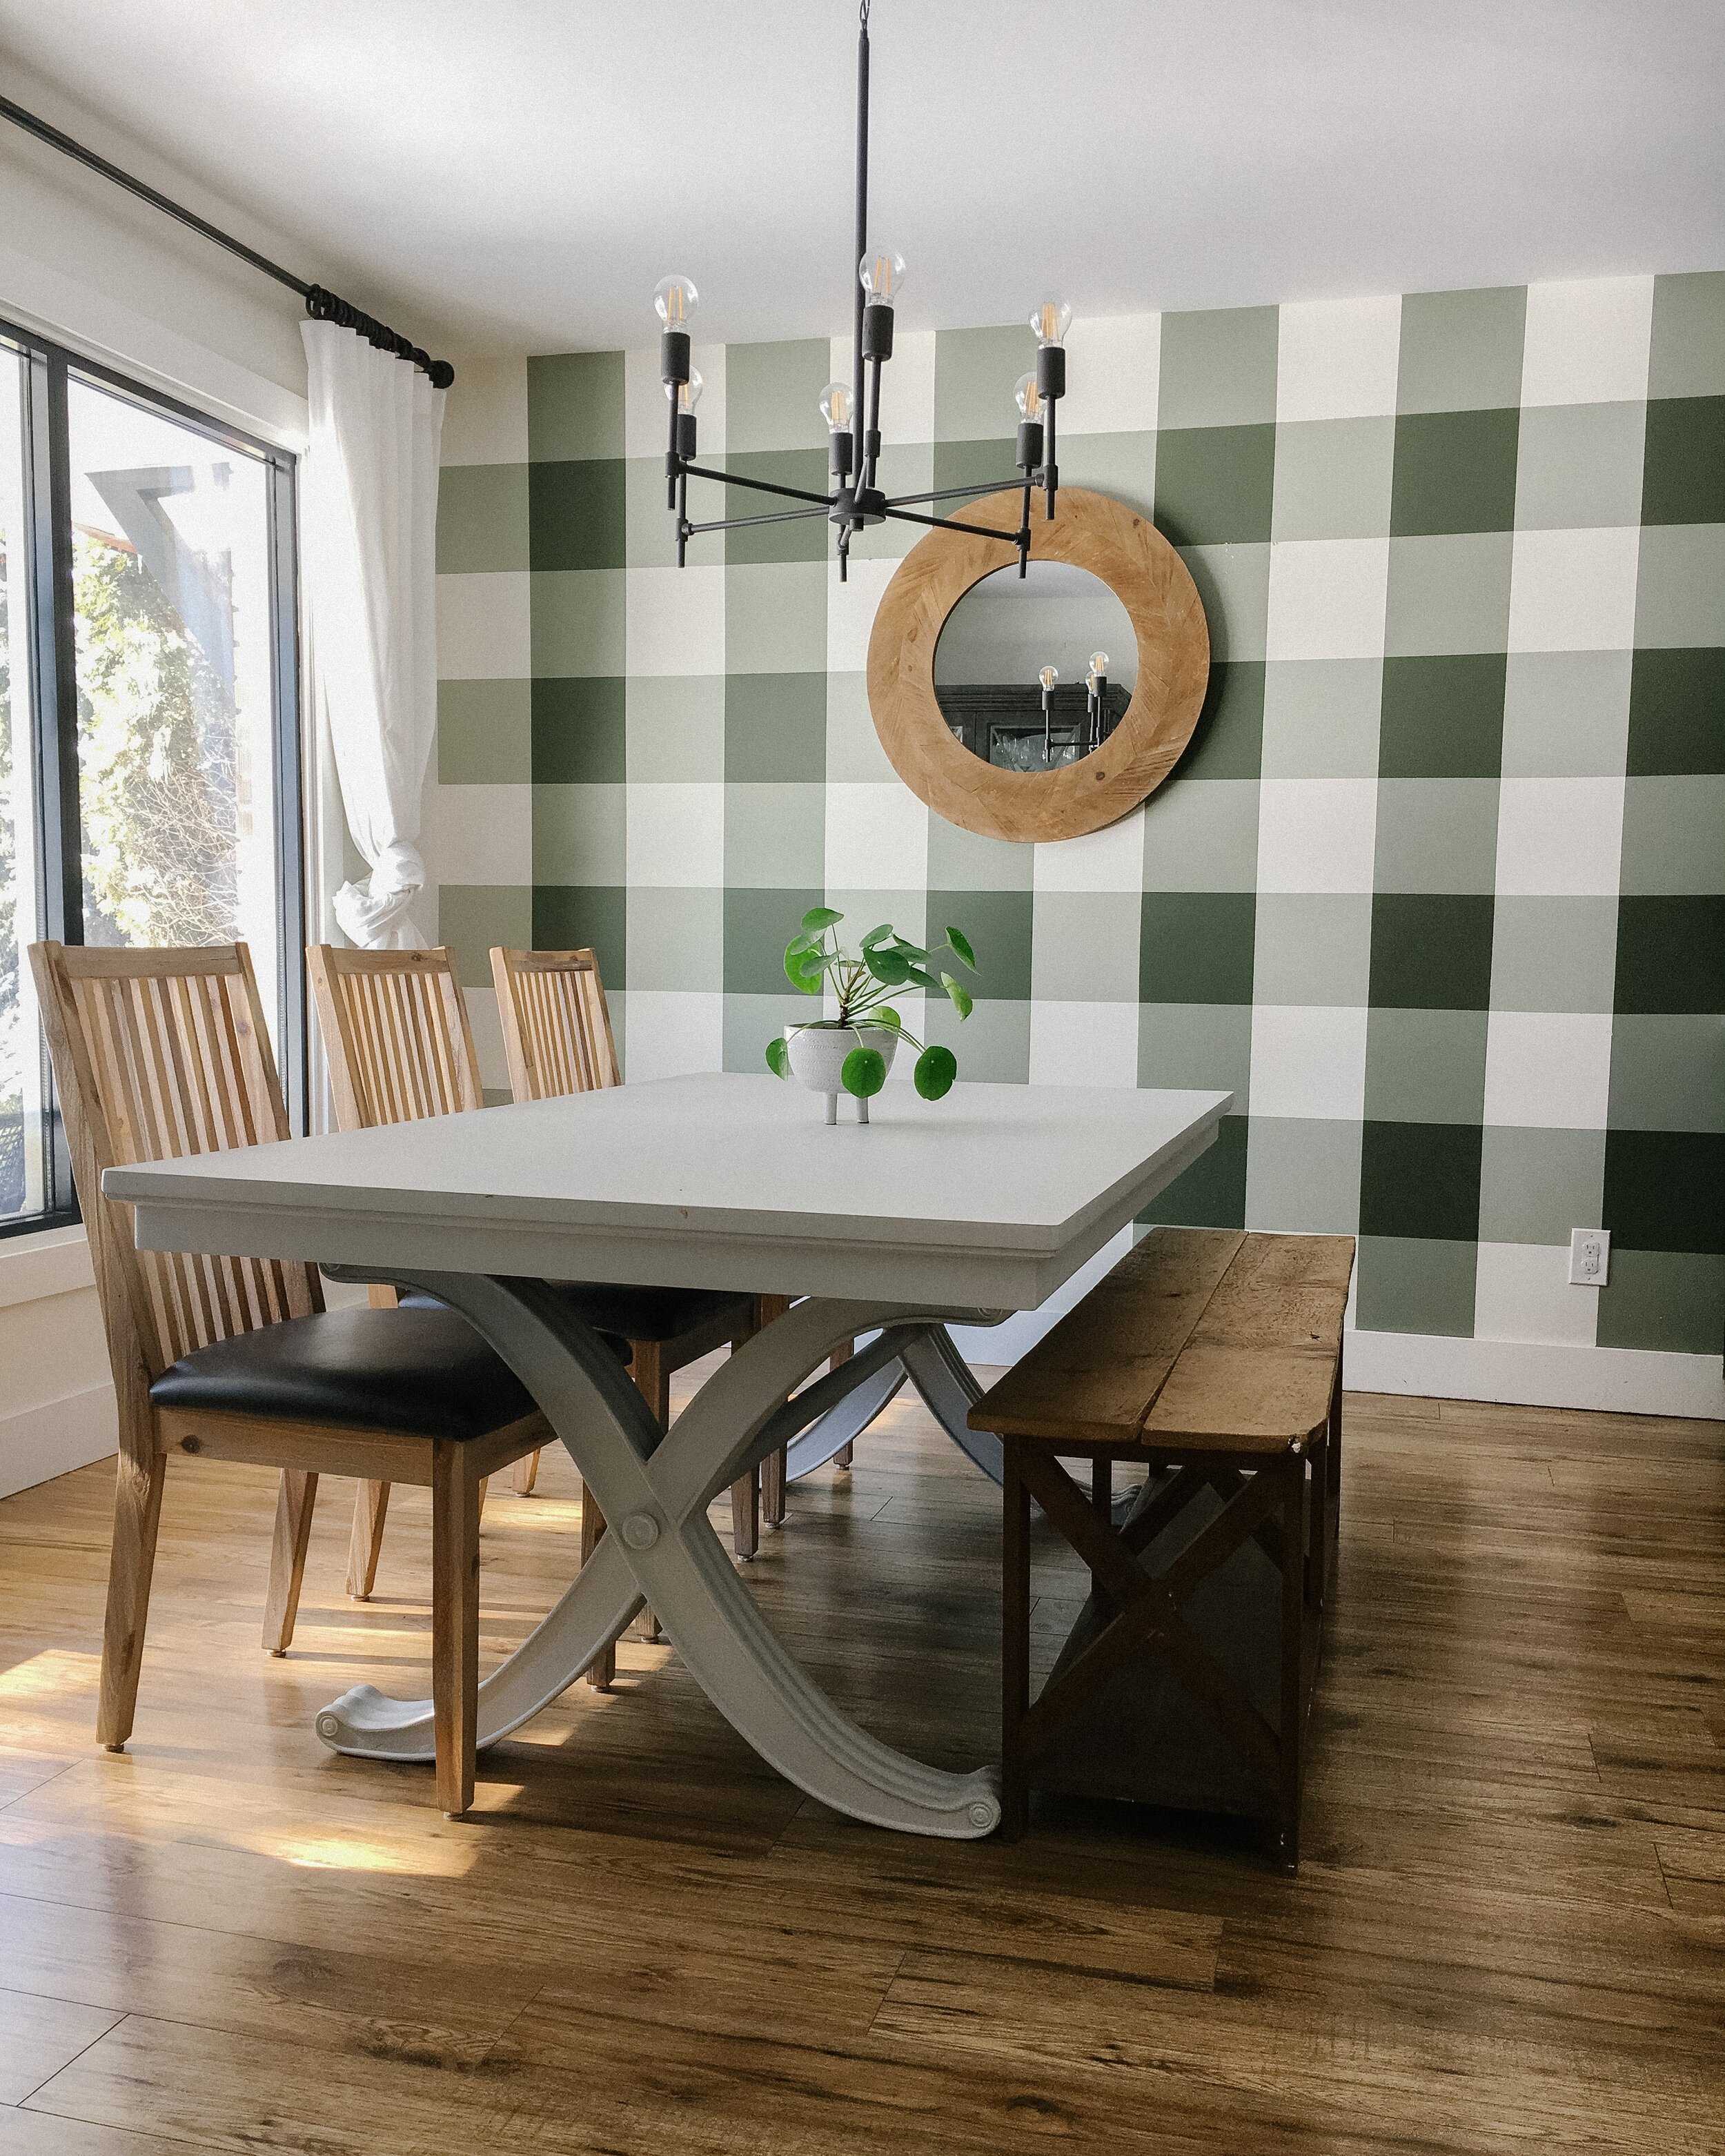 dining room with green buffalo plaid wall, grey table, 3 wooden chairs and a wooden bench, round wooden mirror on the wall and black chandelier.